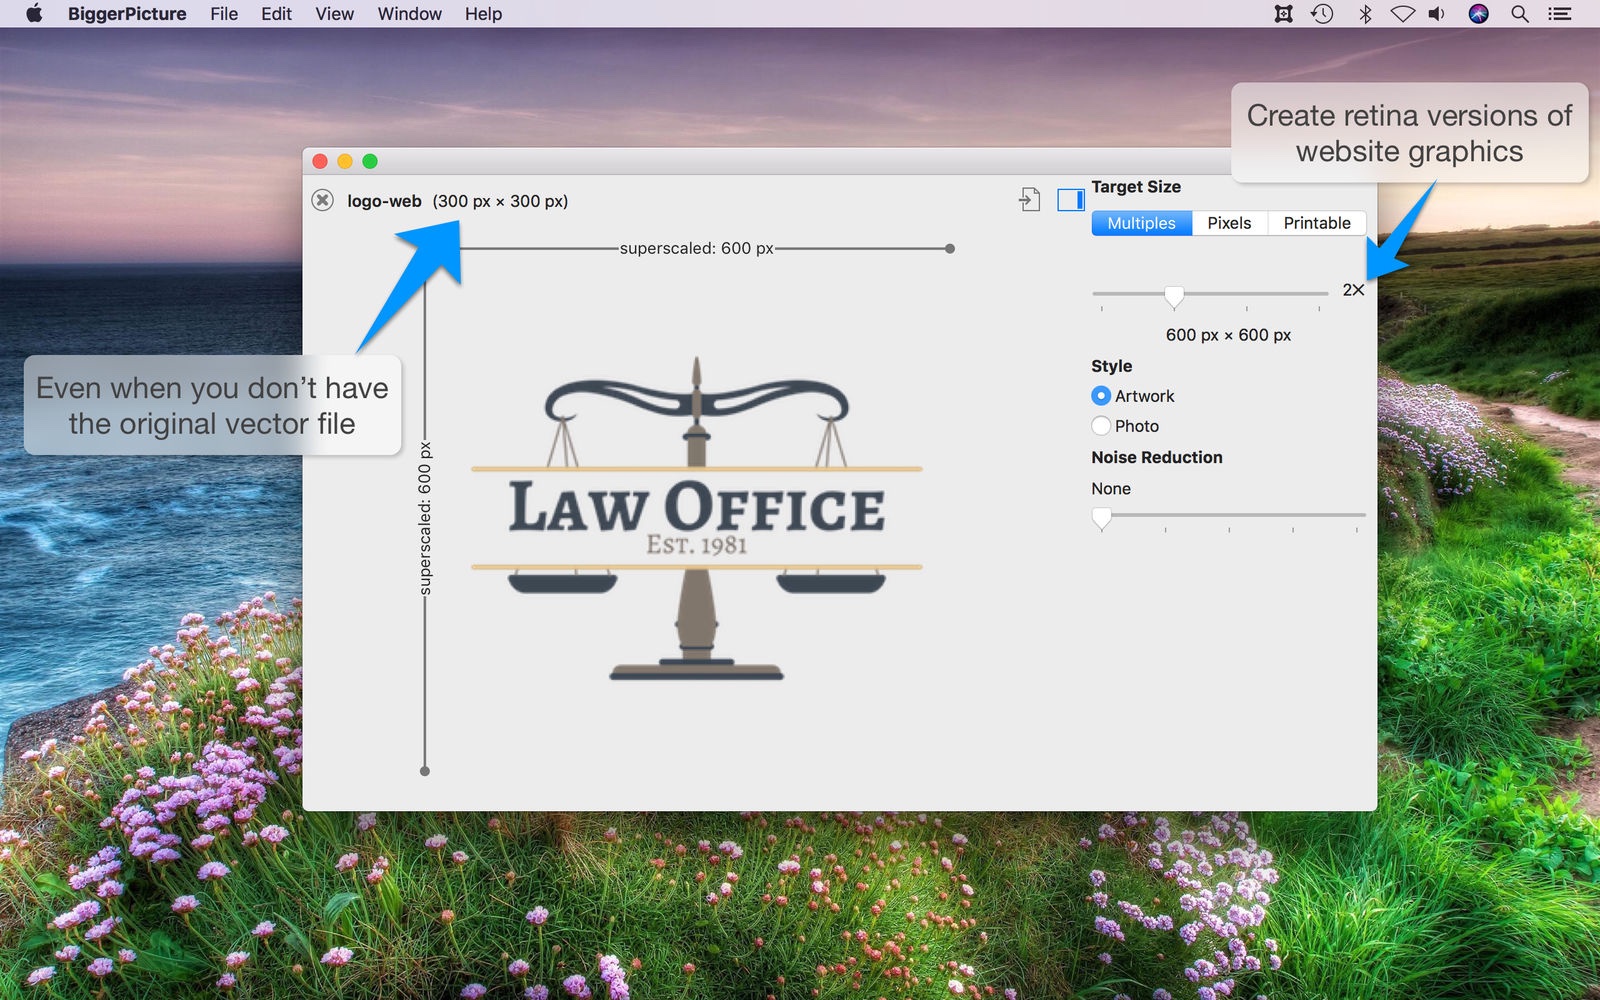 Basil Salad Software releases BiggerPicture 1.0 for the Mac